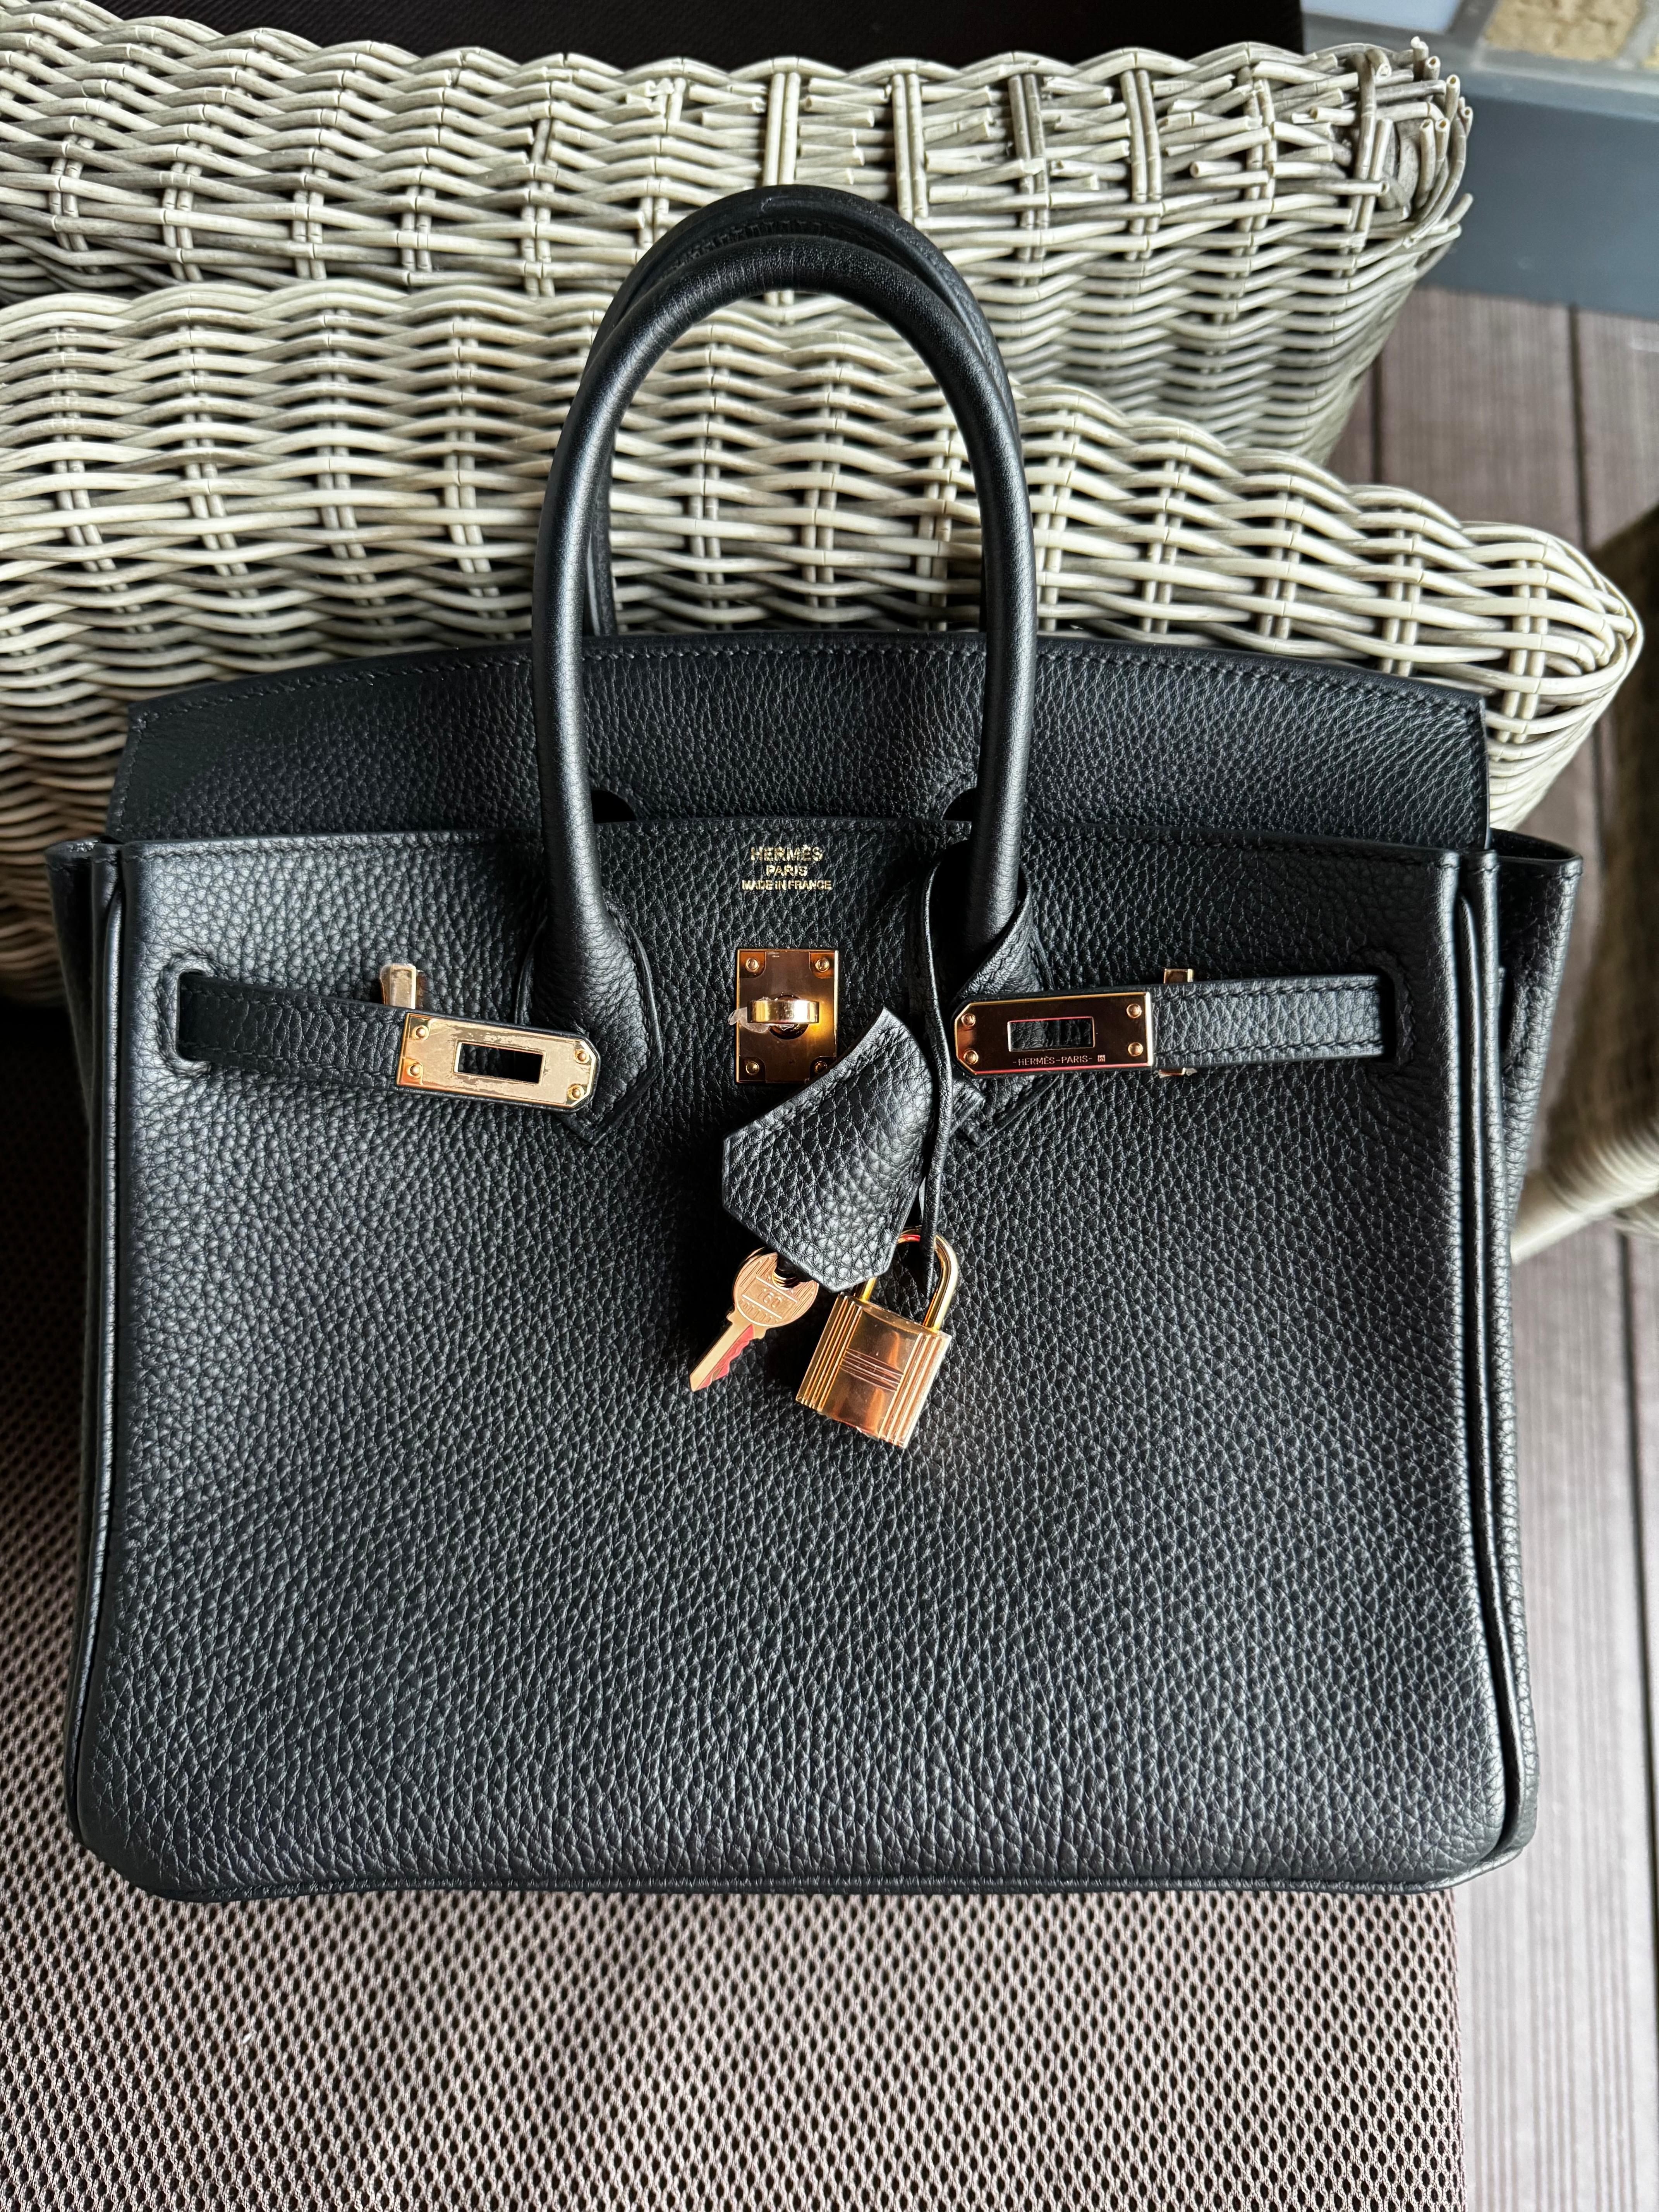 Hermes Birkin 25 Black togo rose gold hardware handbag. One of the most classic bags, timeless! 

Comes with dustbag and box. Z stamp, most stickers on, excellent condition. Comes with bababebi authentication certificate. 